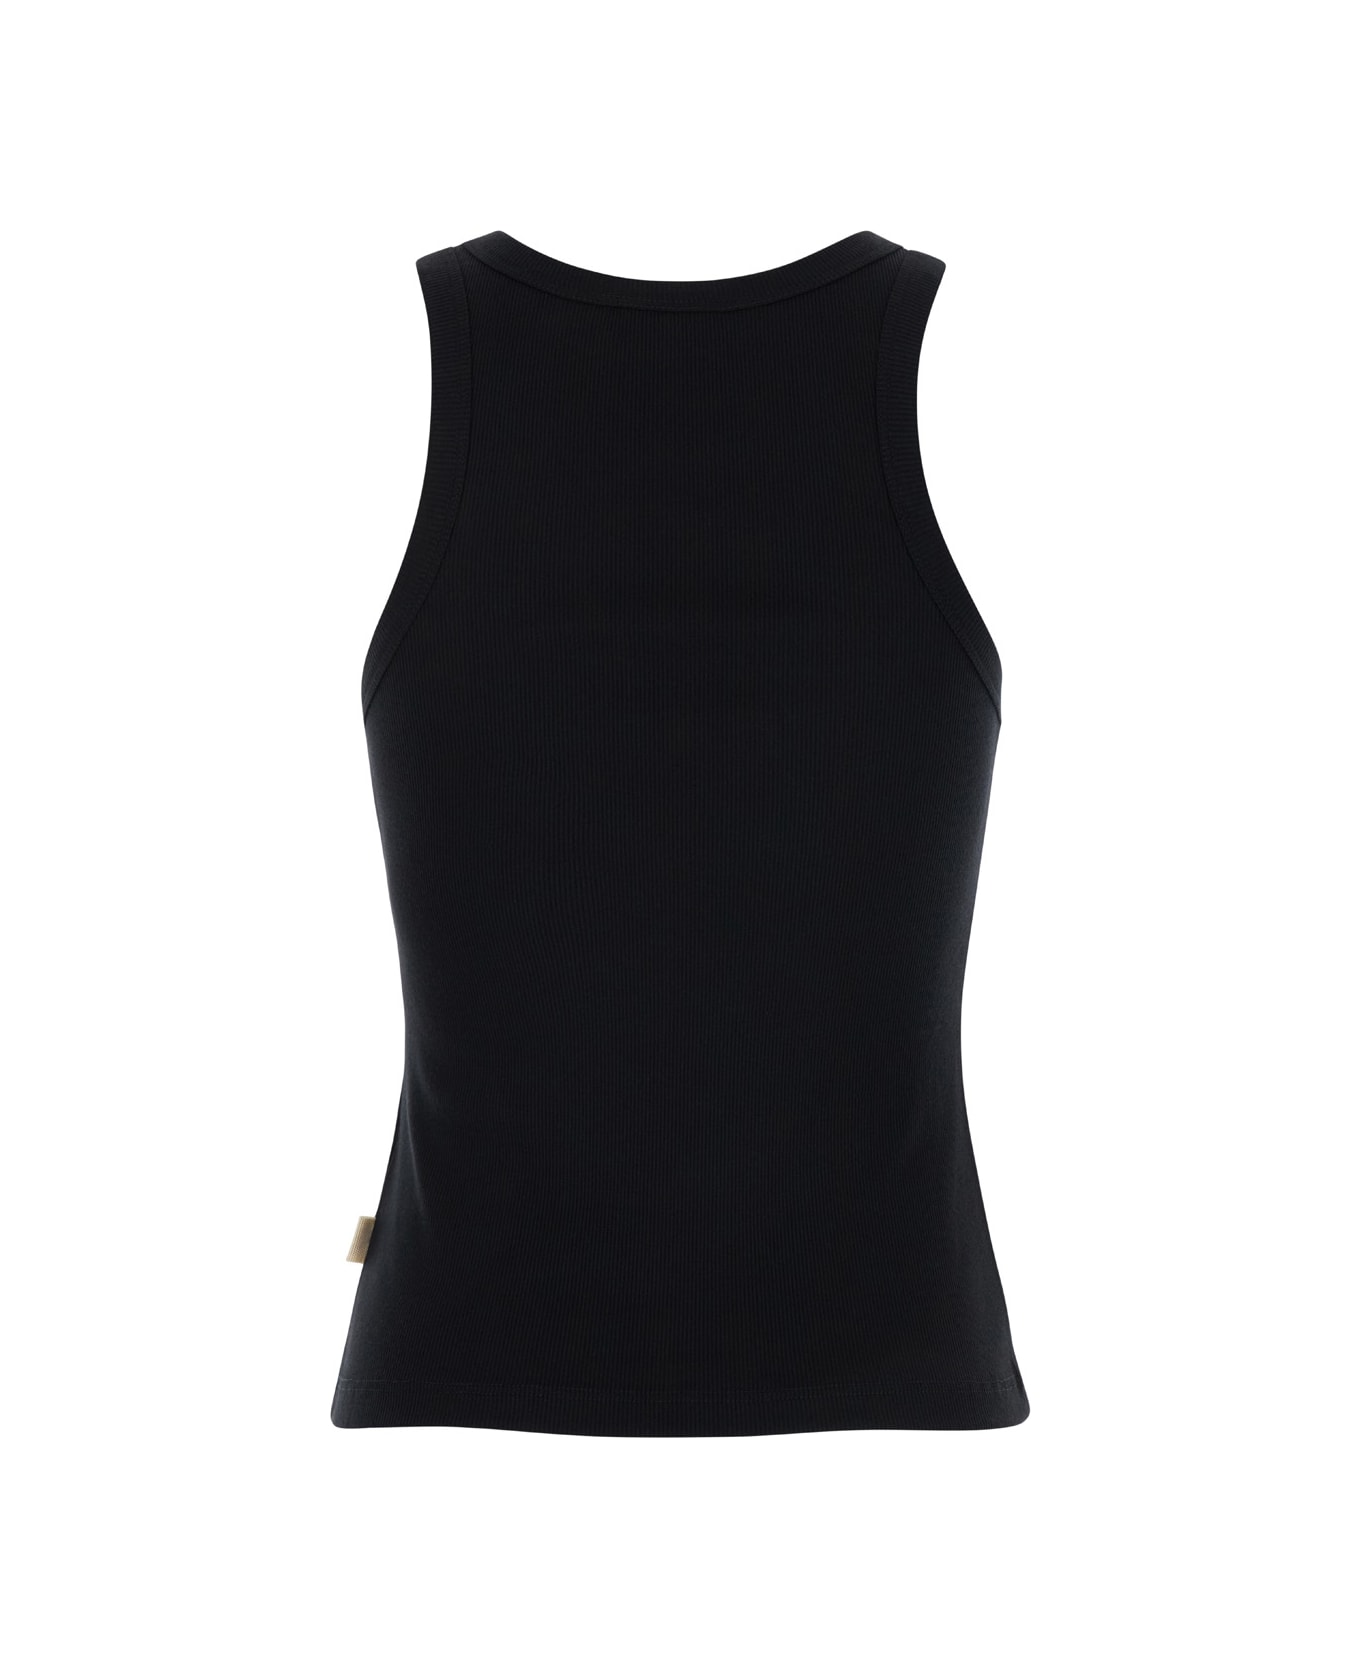 SEMICOUTURE Black Ribbed Tank Top With U Neckline In Cotton And Modal Blend Woman - Black